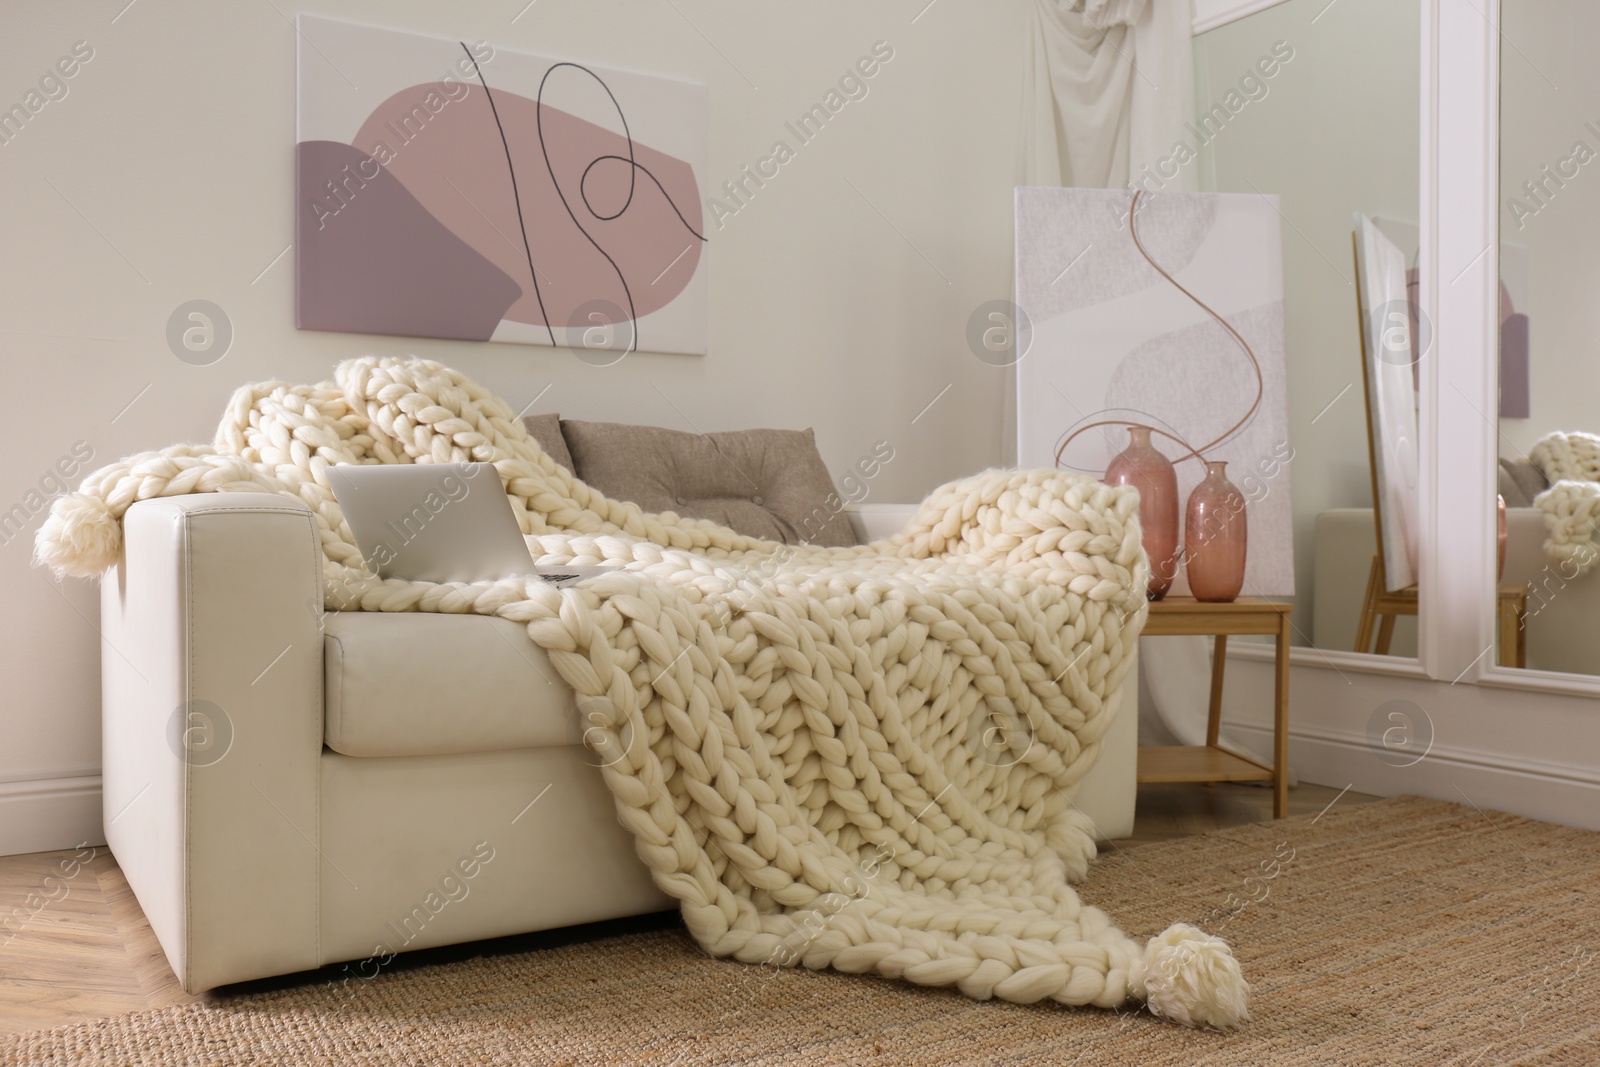 Photo of Soft knitted blanket and modern laptop on couch in living room. Interior element